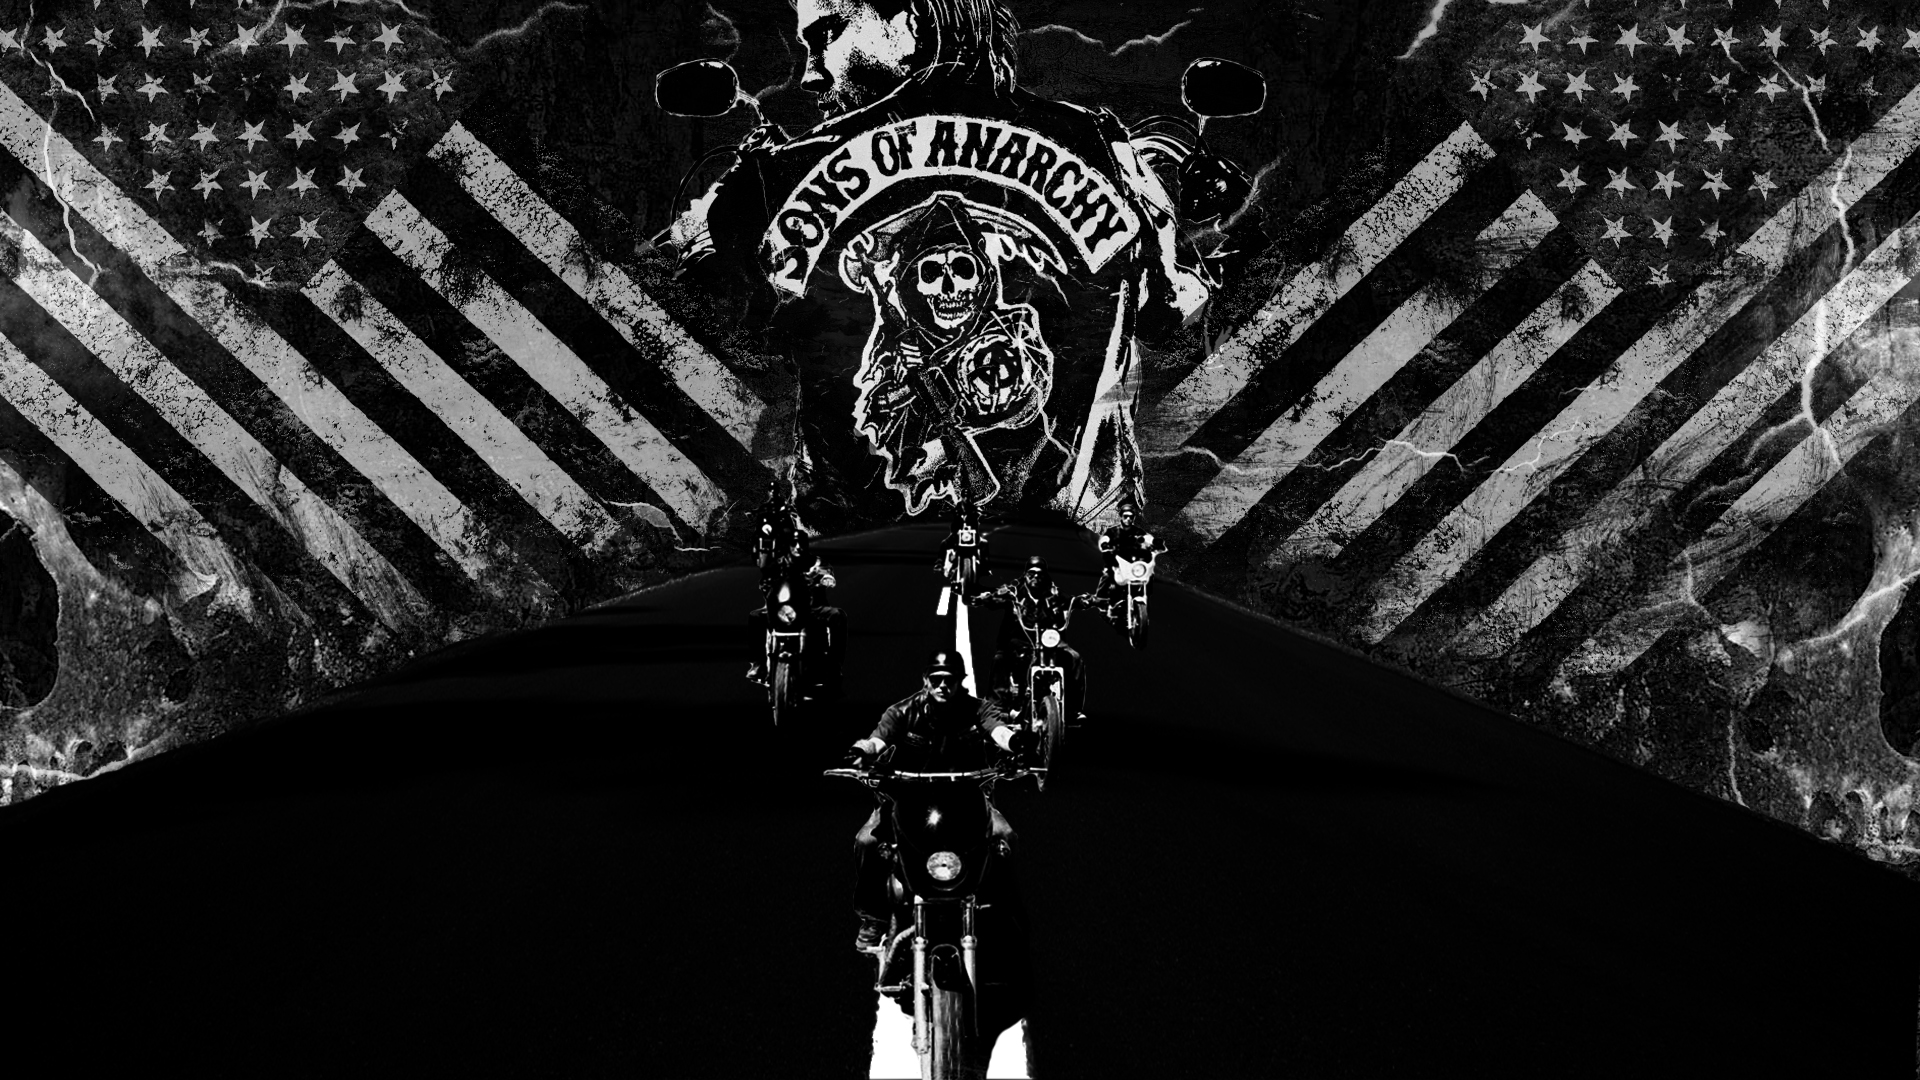 Sons Of Anarchy Wallpapers and Background Images   stmednet